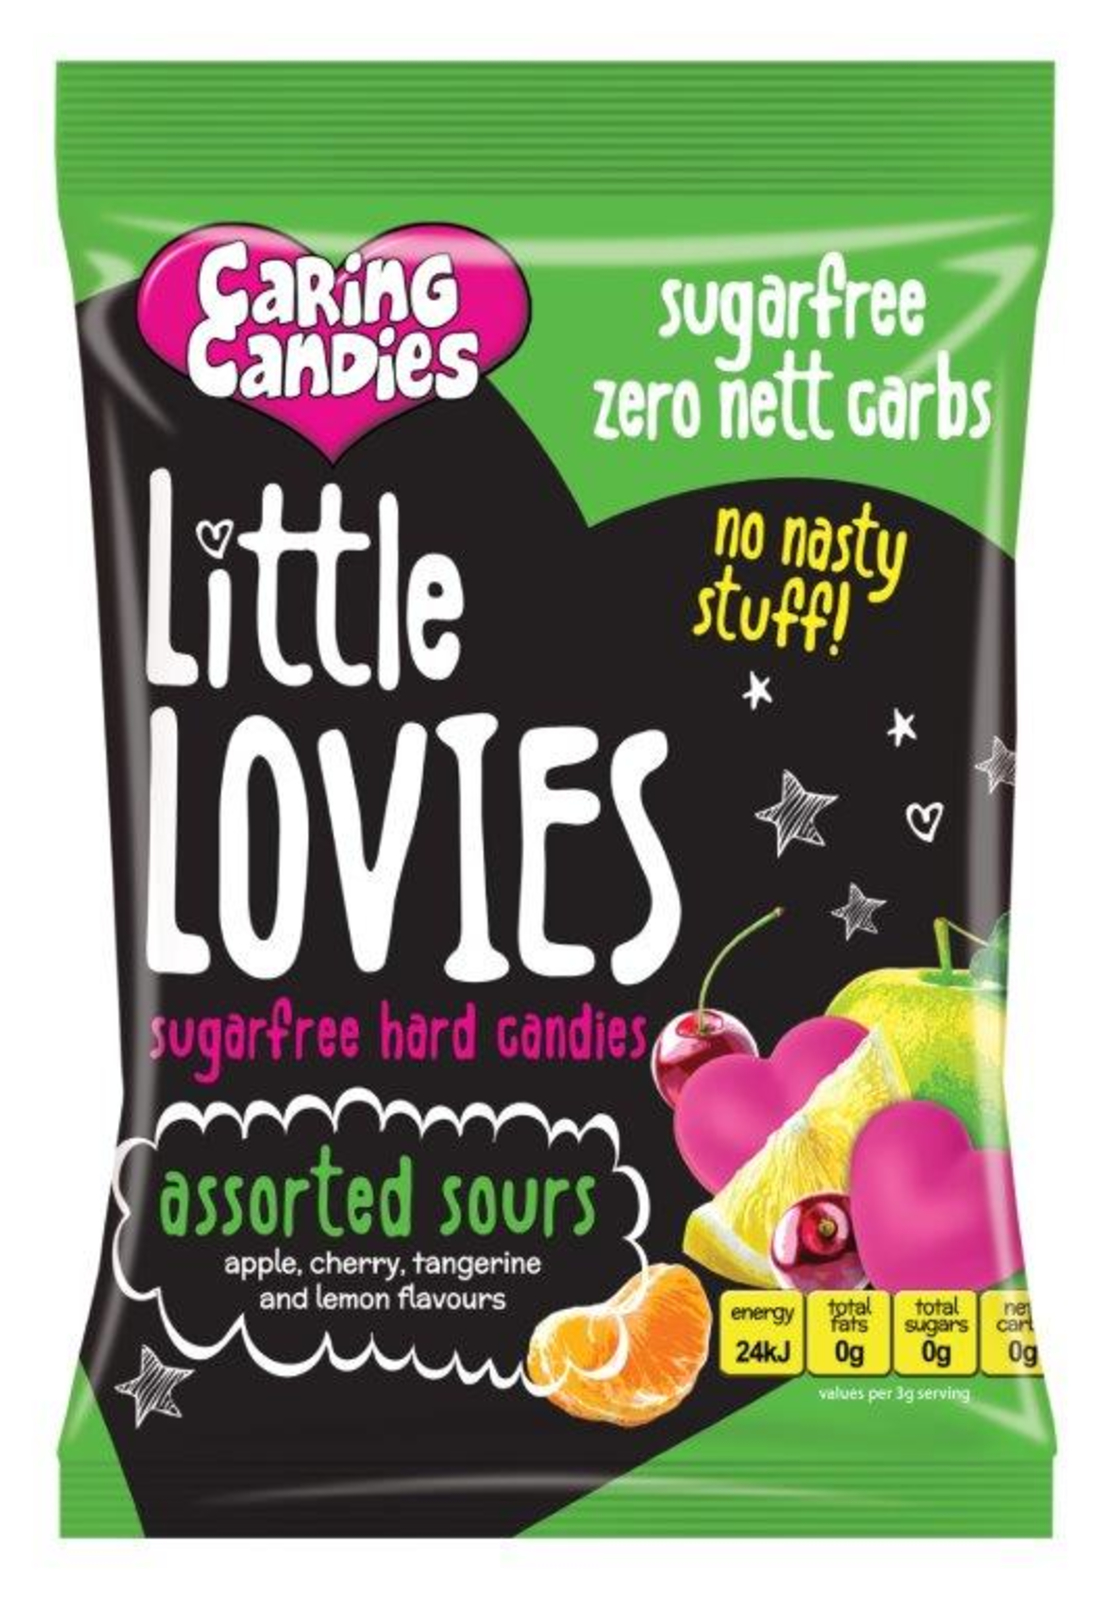 Caring Candies Little Lovies Sours 100g or 1kg